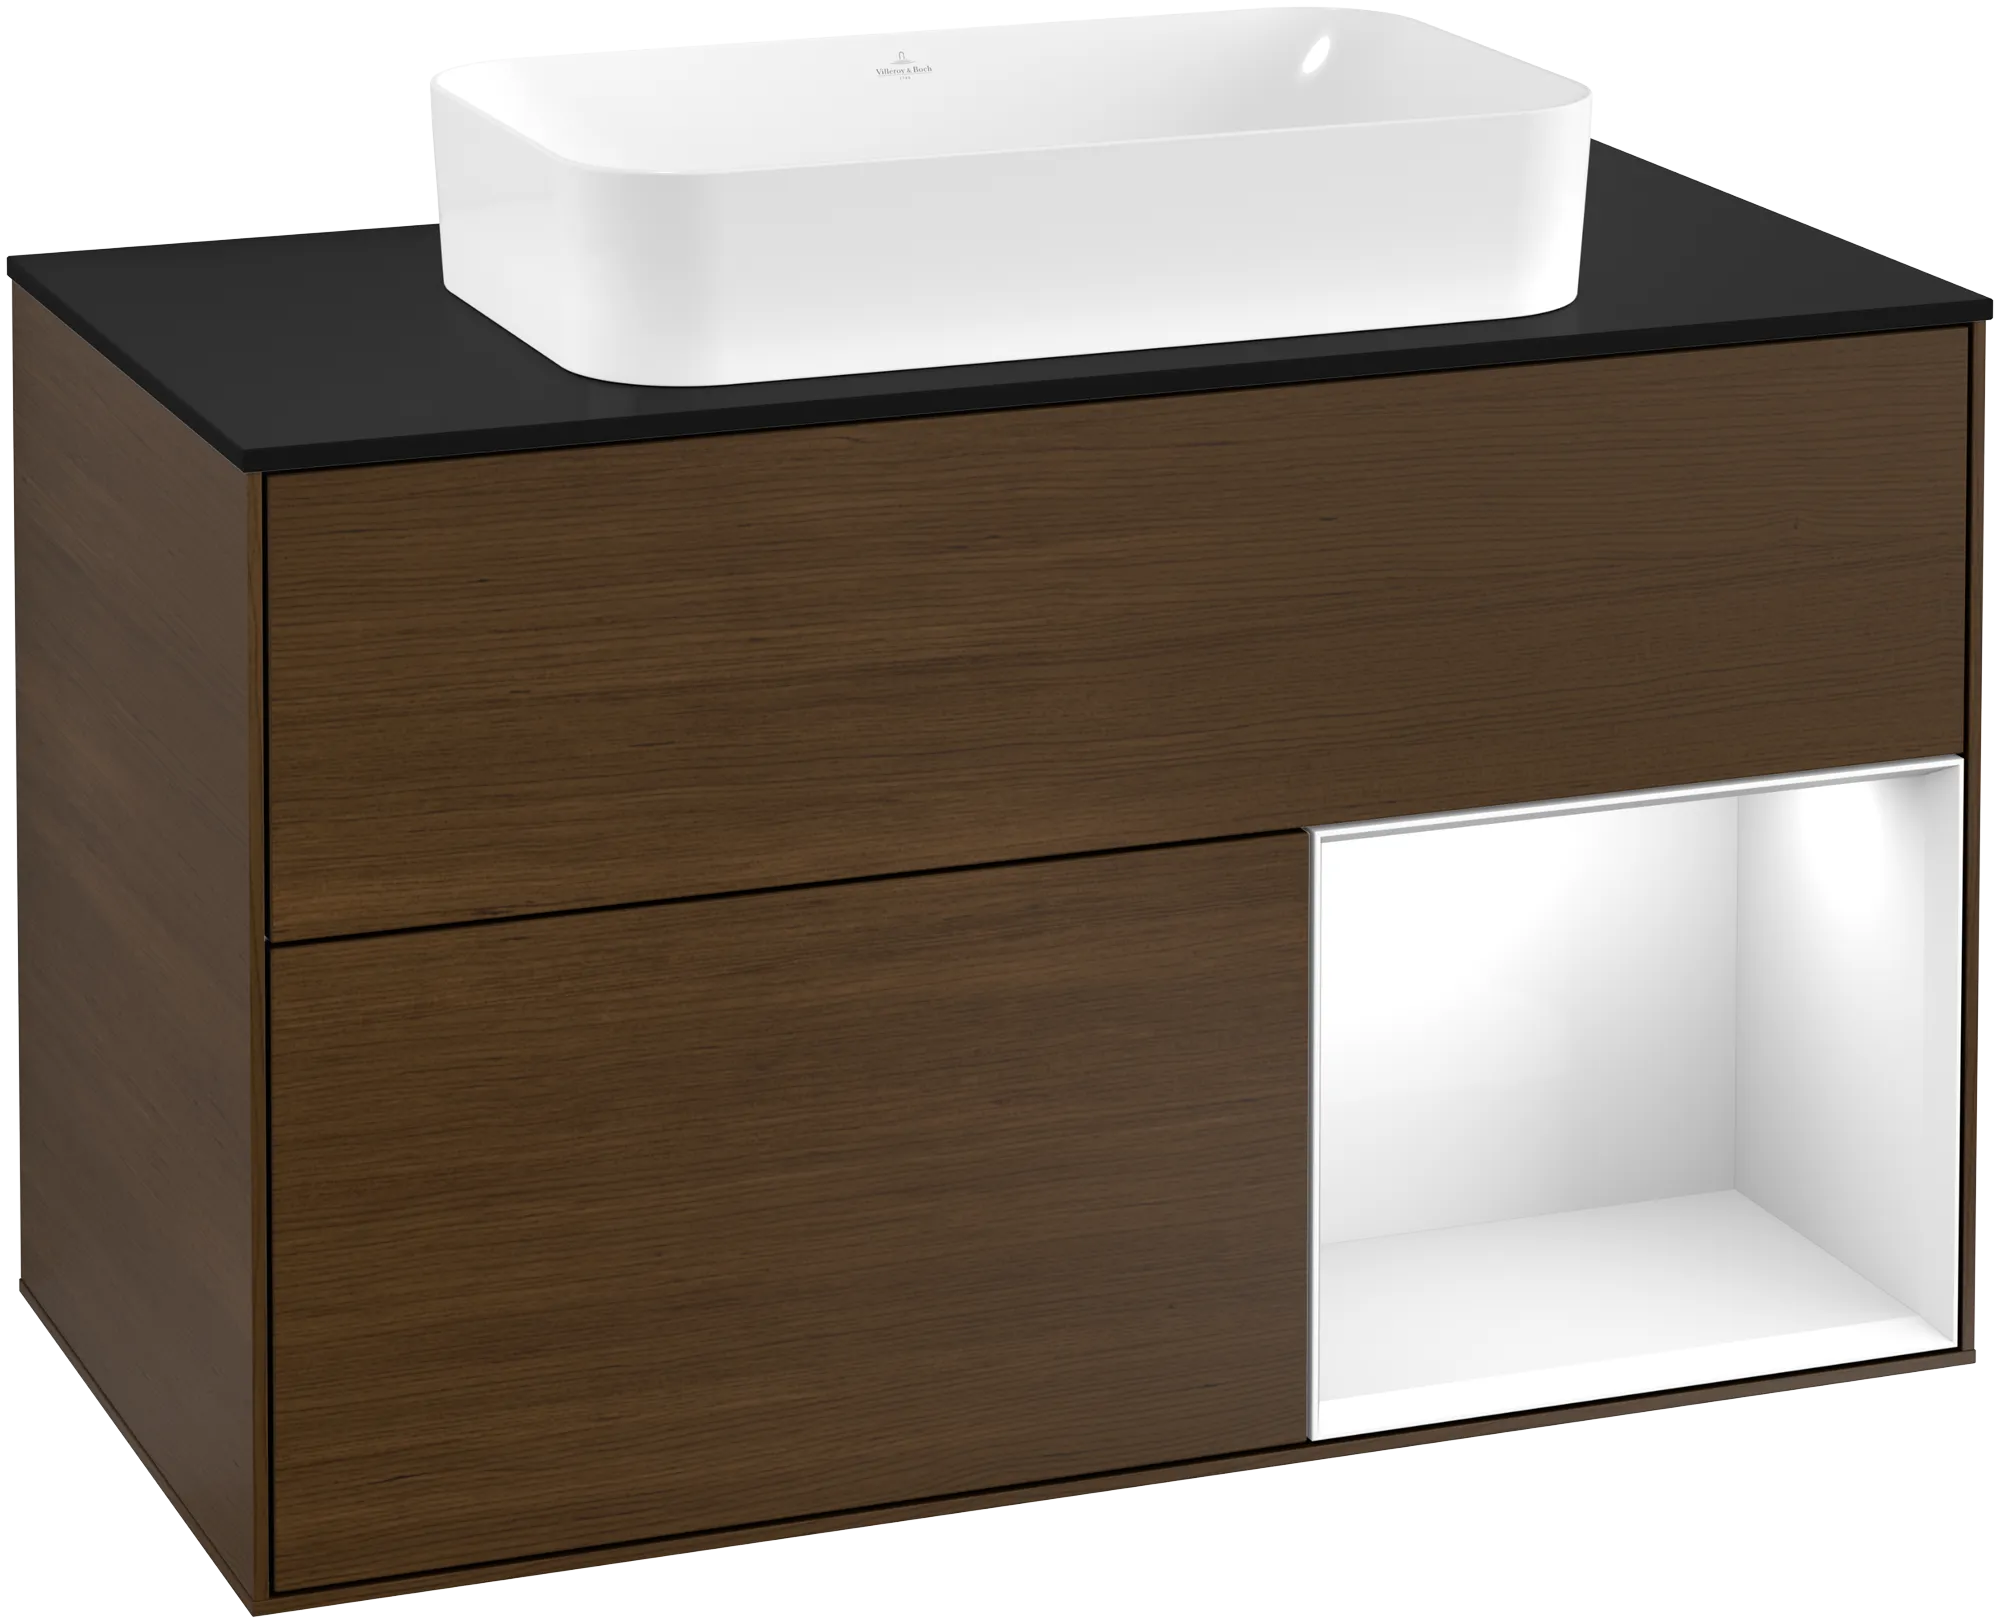 Picture of VILLEROY BOCH Finion Vanity unit, with lighting, 2 pull-out compartments, 1000 x 603 x 501 mm, Walnut Veneer / Glossy White Lacquer / Glass Black Matt #G252GFGN